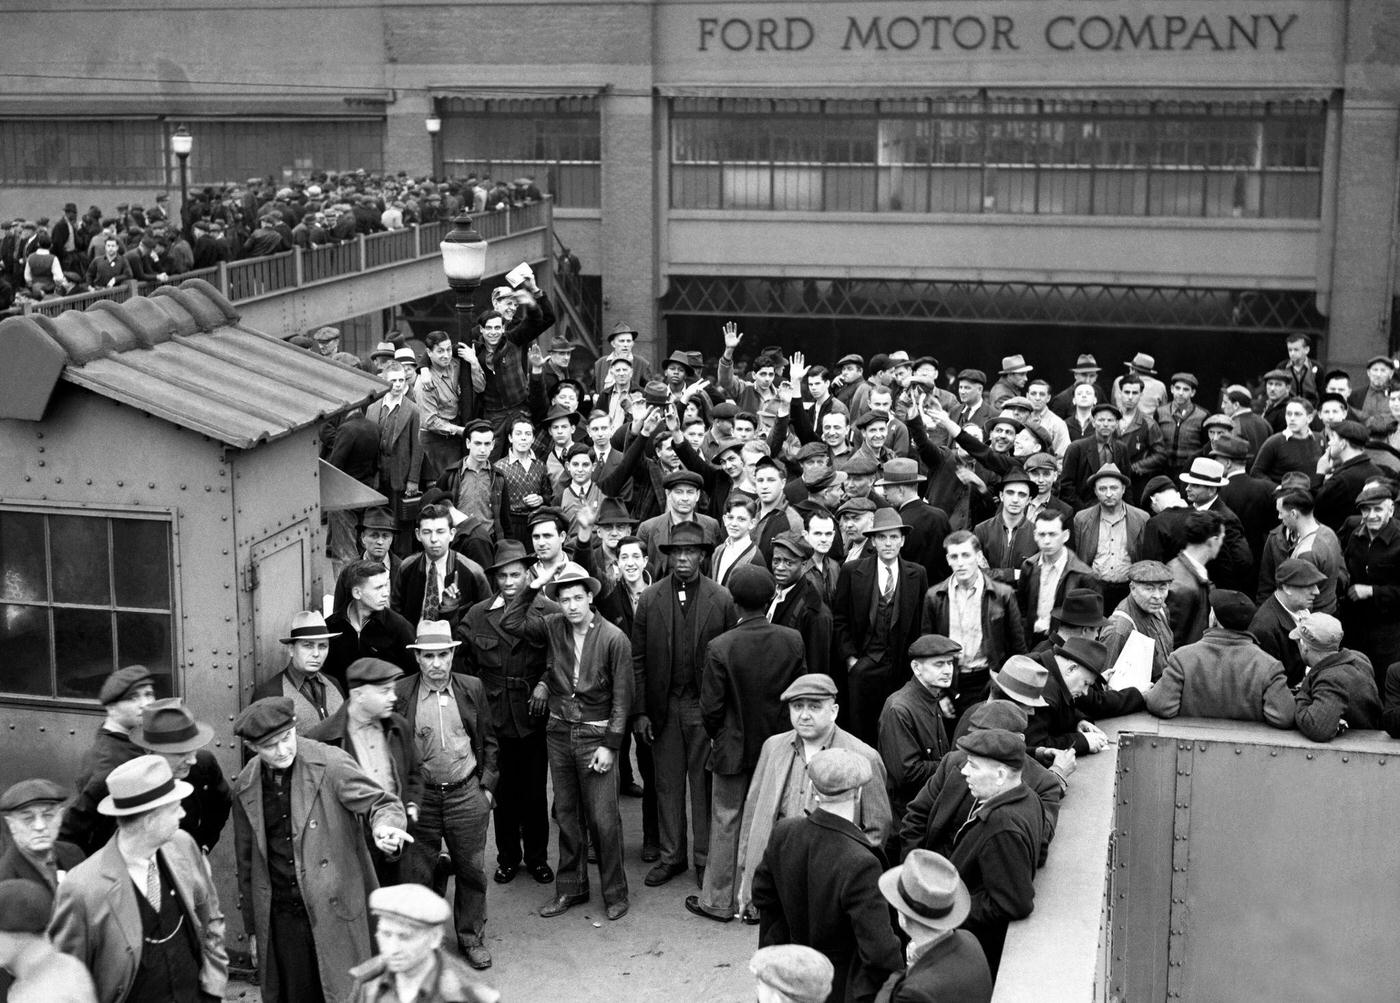 A large crowd of people gather in front of the Ford Motor Company River Rouge plant during the Detroit Ford Labor strike in Dearborn, Michigan, April 1941.